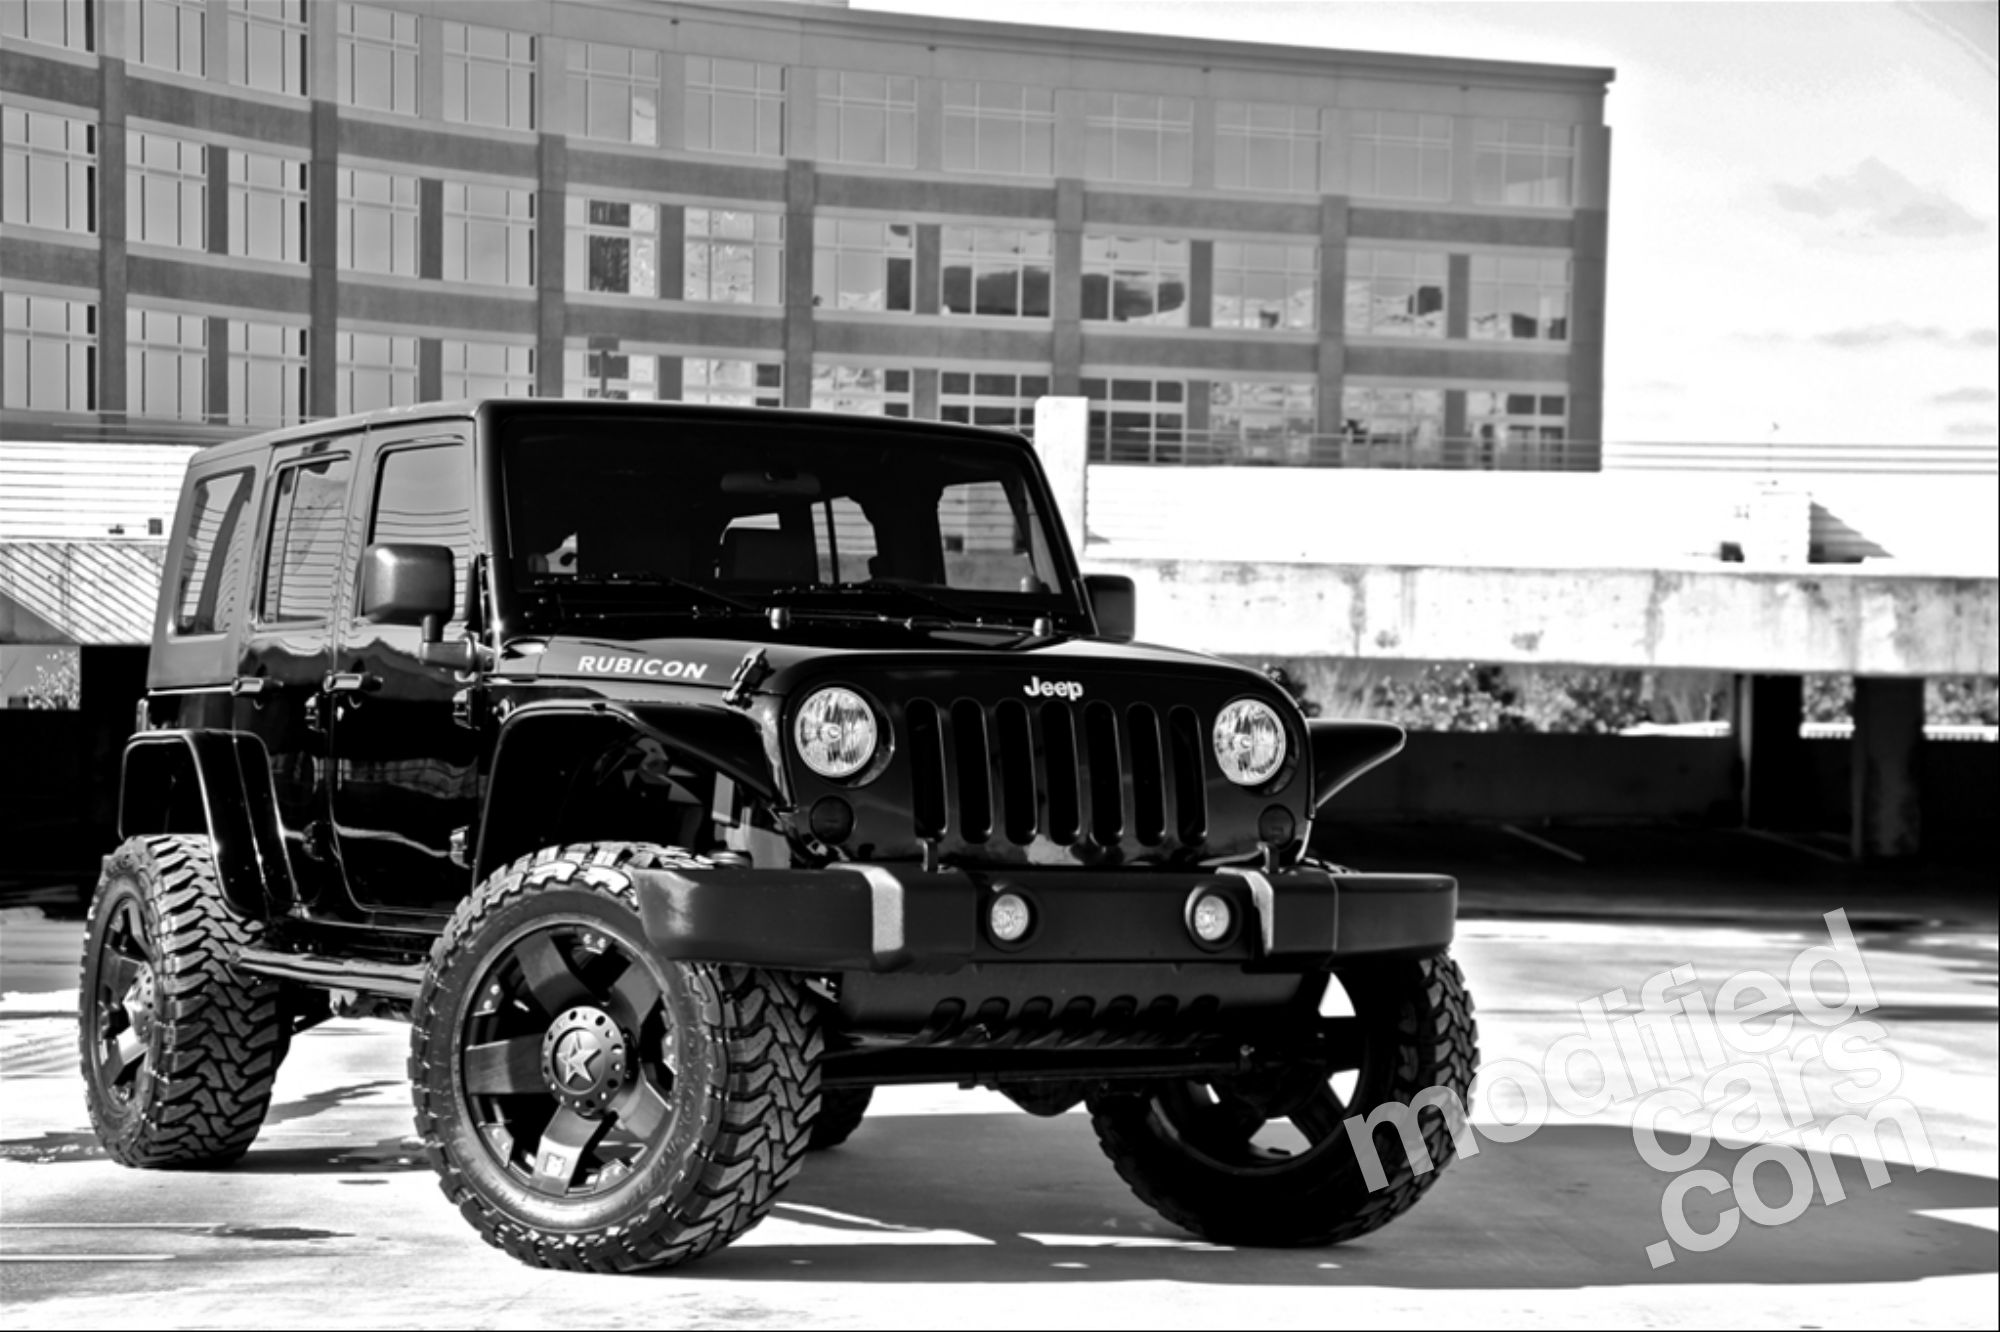 2000x1332 Rubicon Wallpaper Rubicon Wallpaper Jk Rubicon Wallpaper And Jeep Rubicon Background